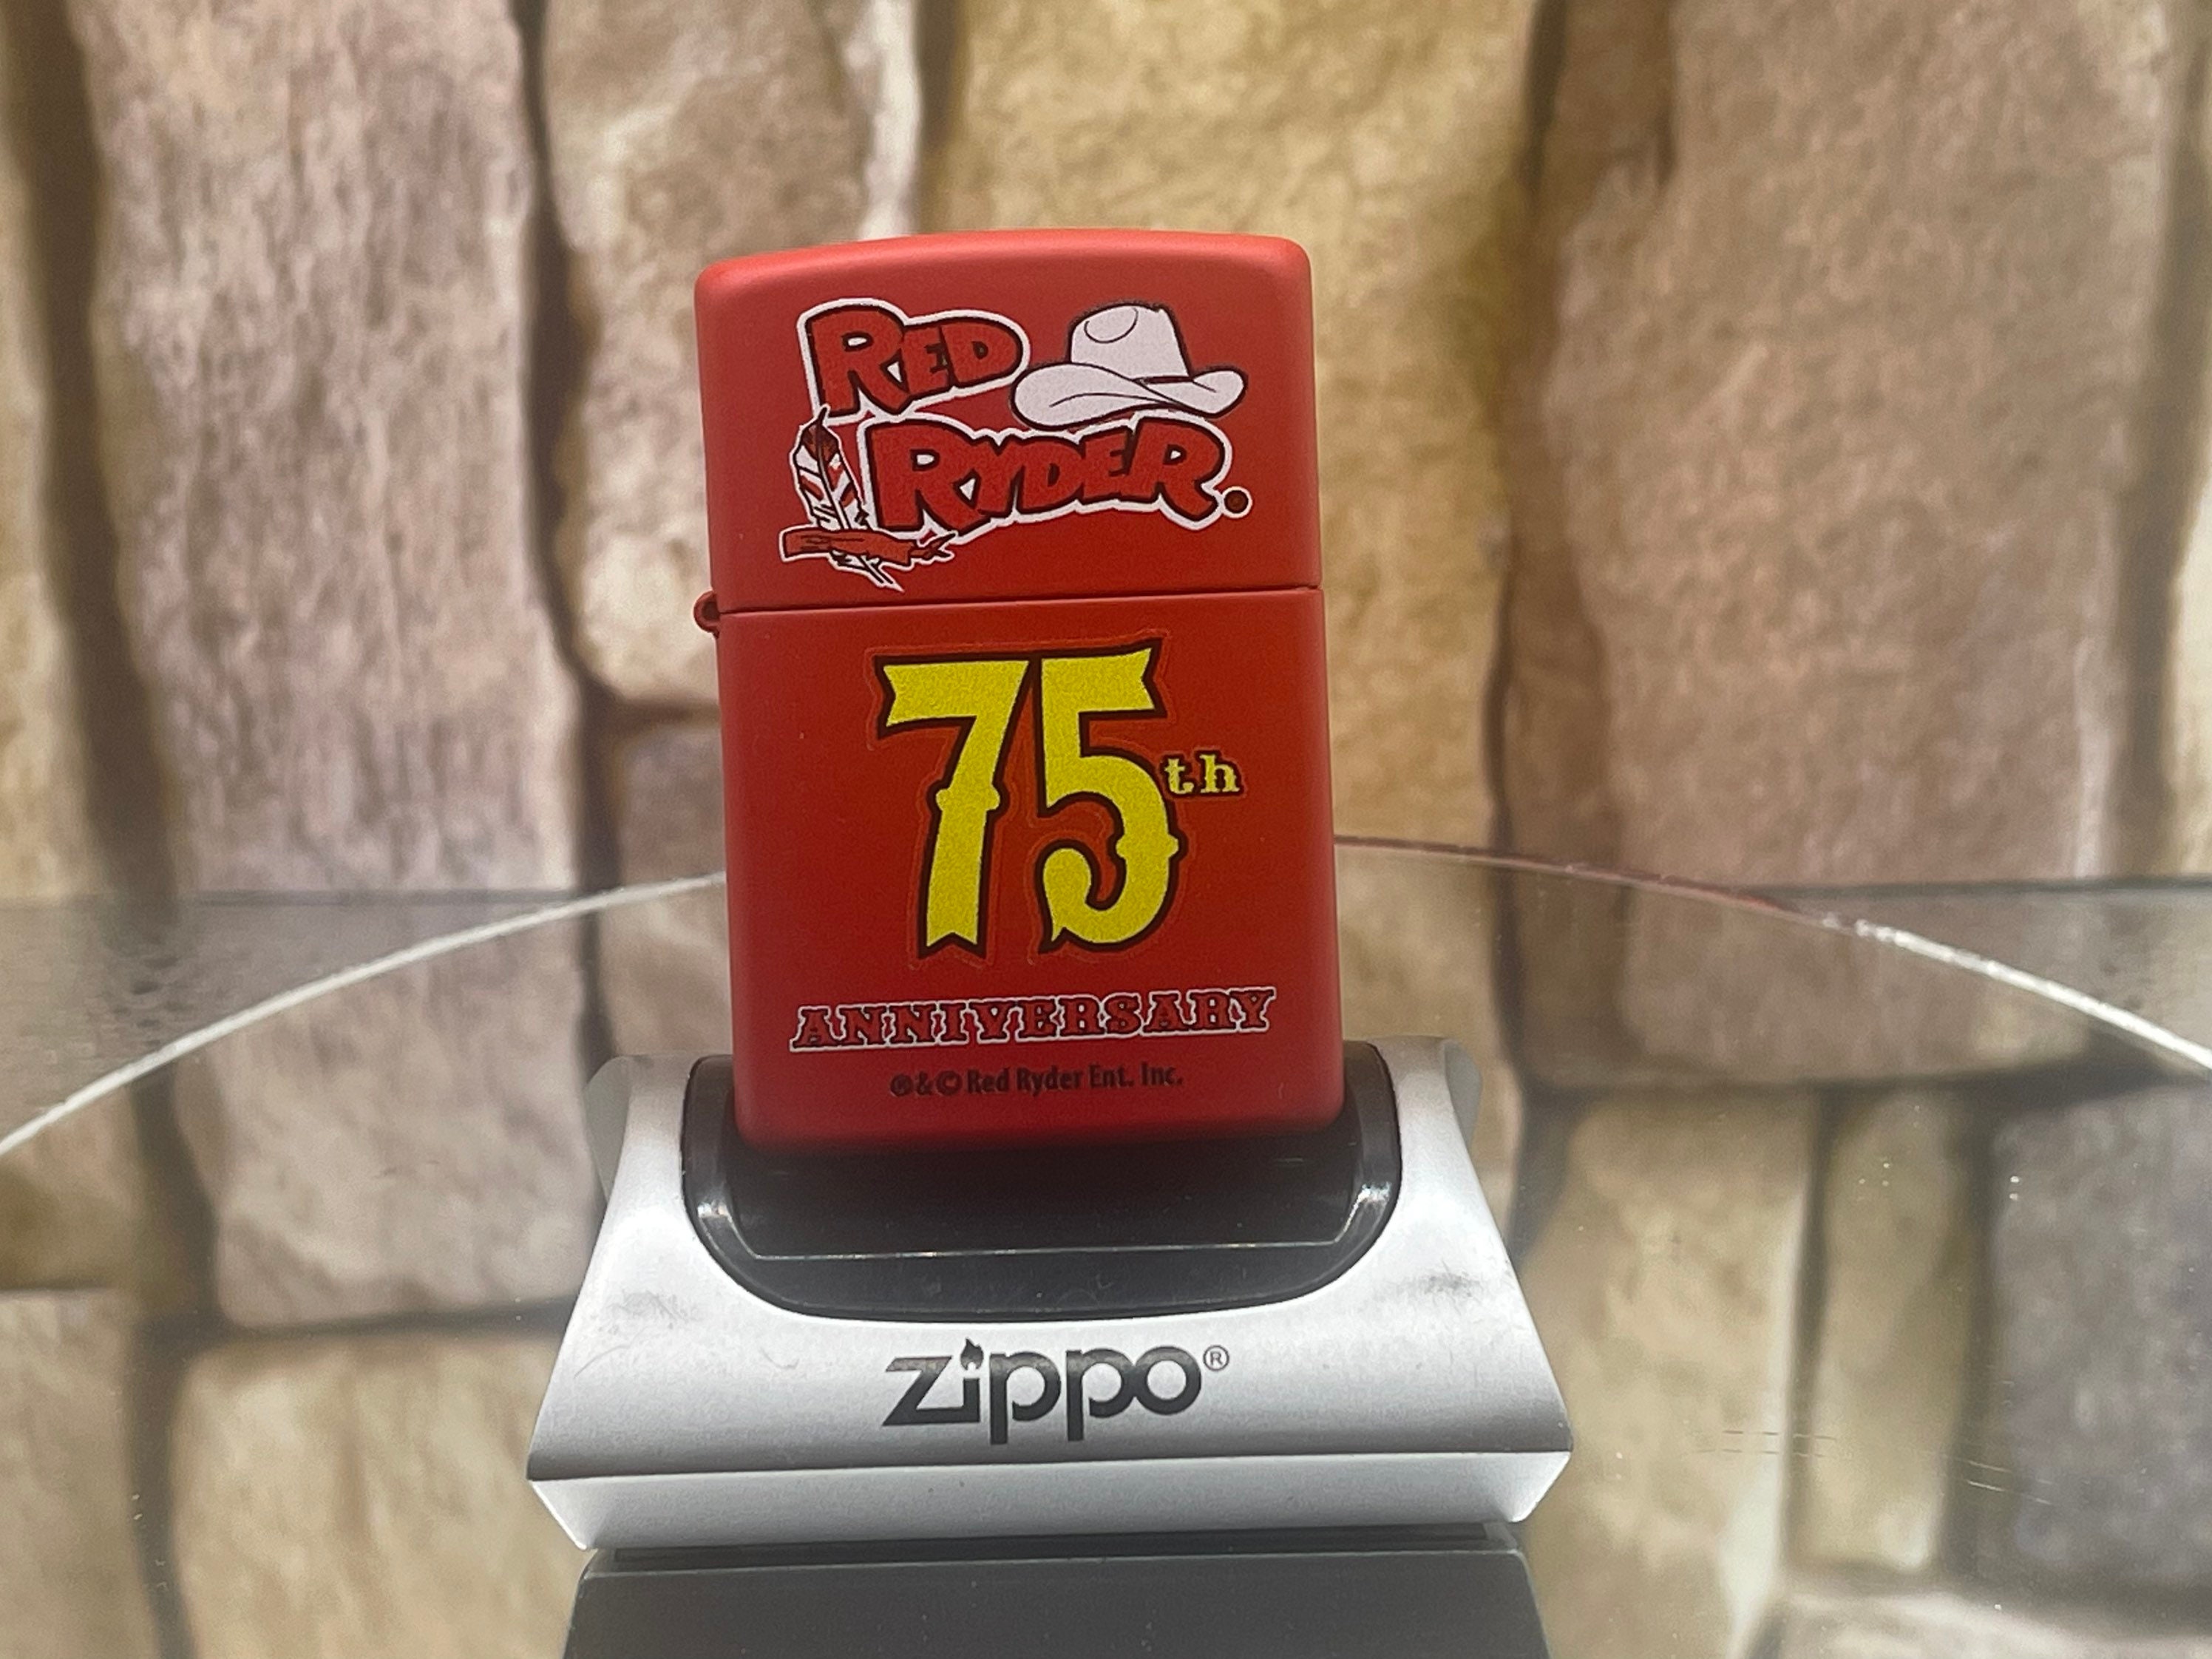 Zippo Red Ryder 75th Anniversary Limited Edition Lighter Ultra